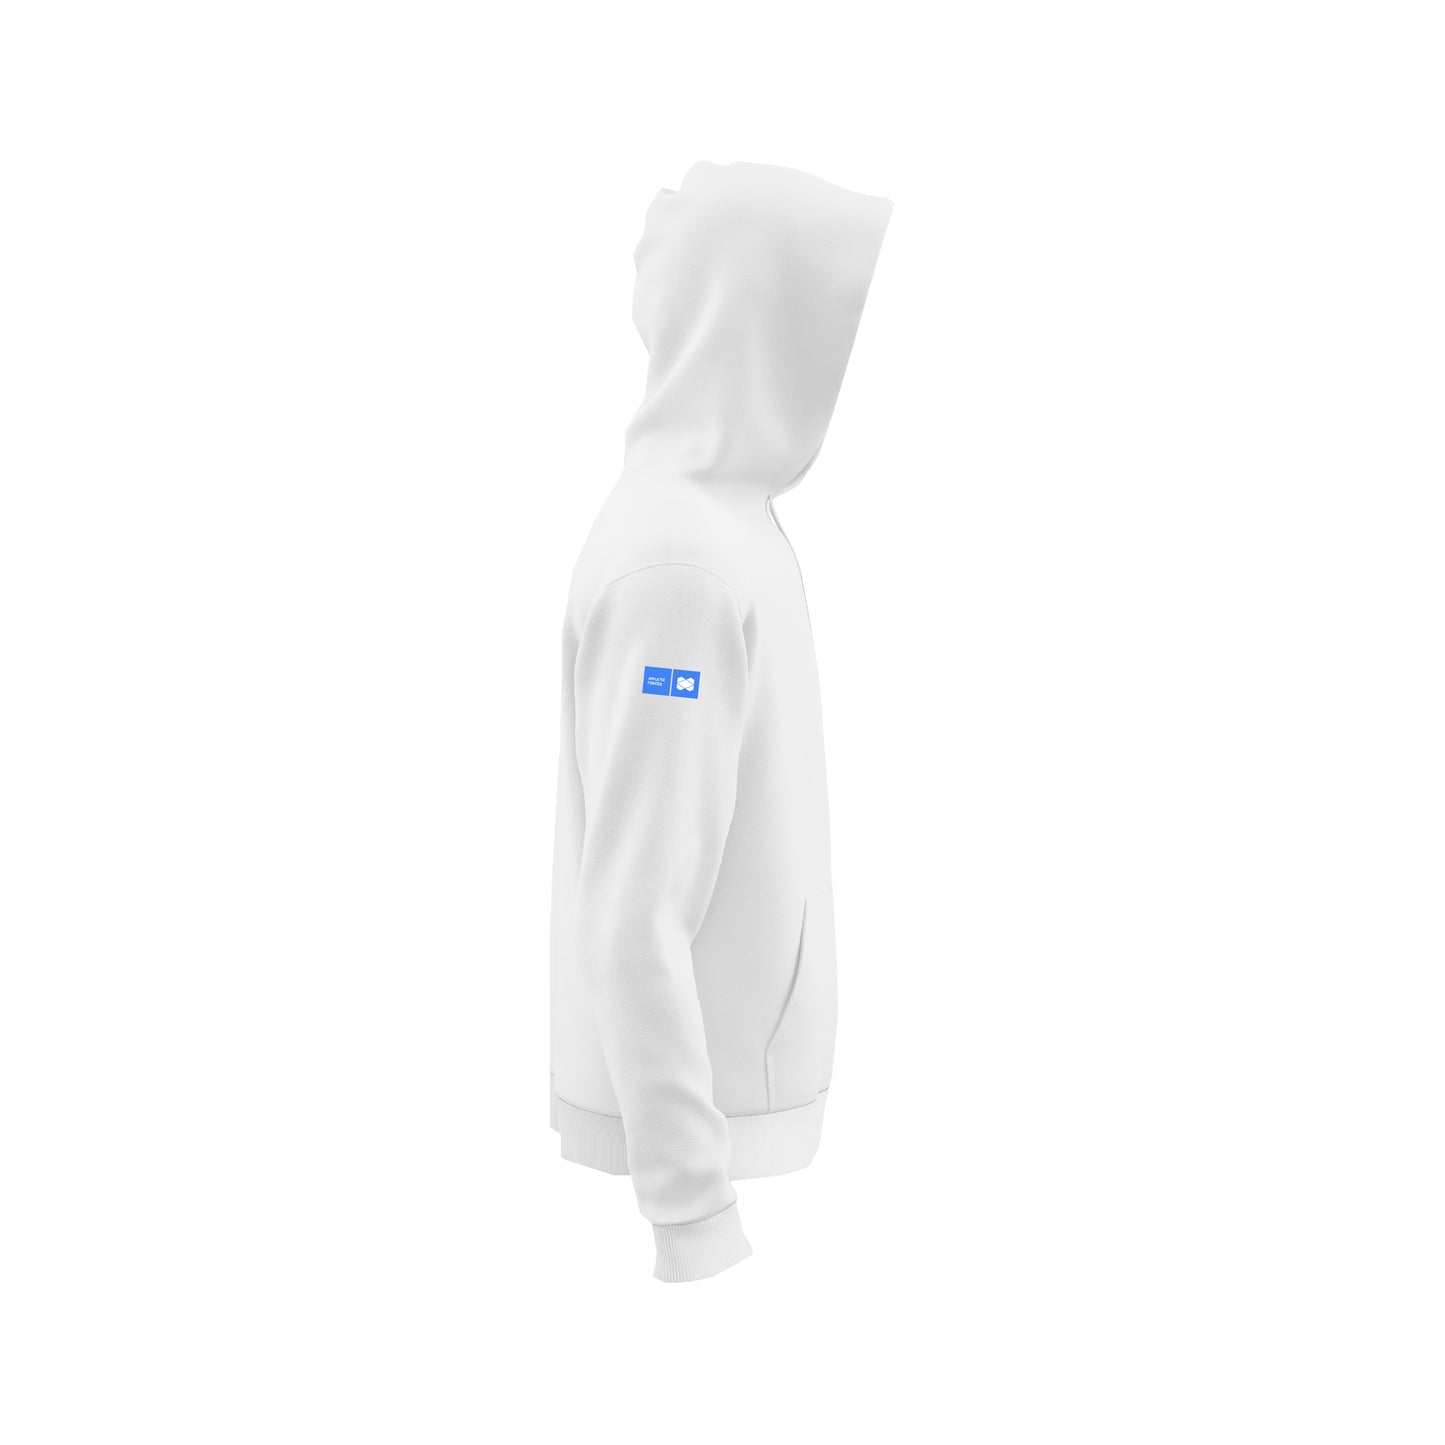 Google - Robot Force ® Hoodie by Athletic Forces -  Model 2